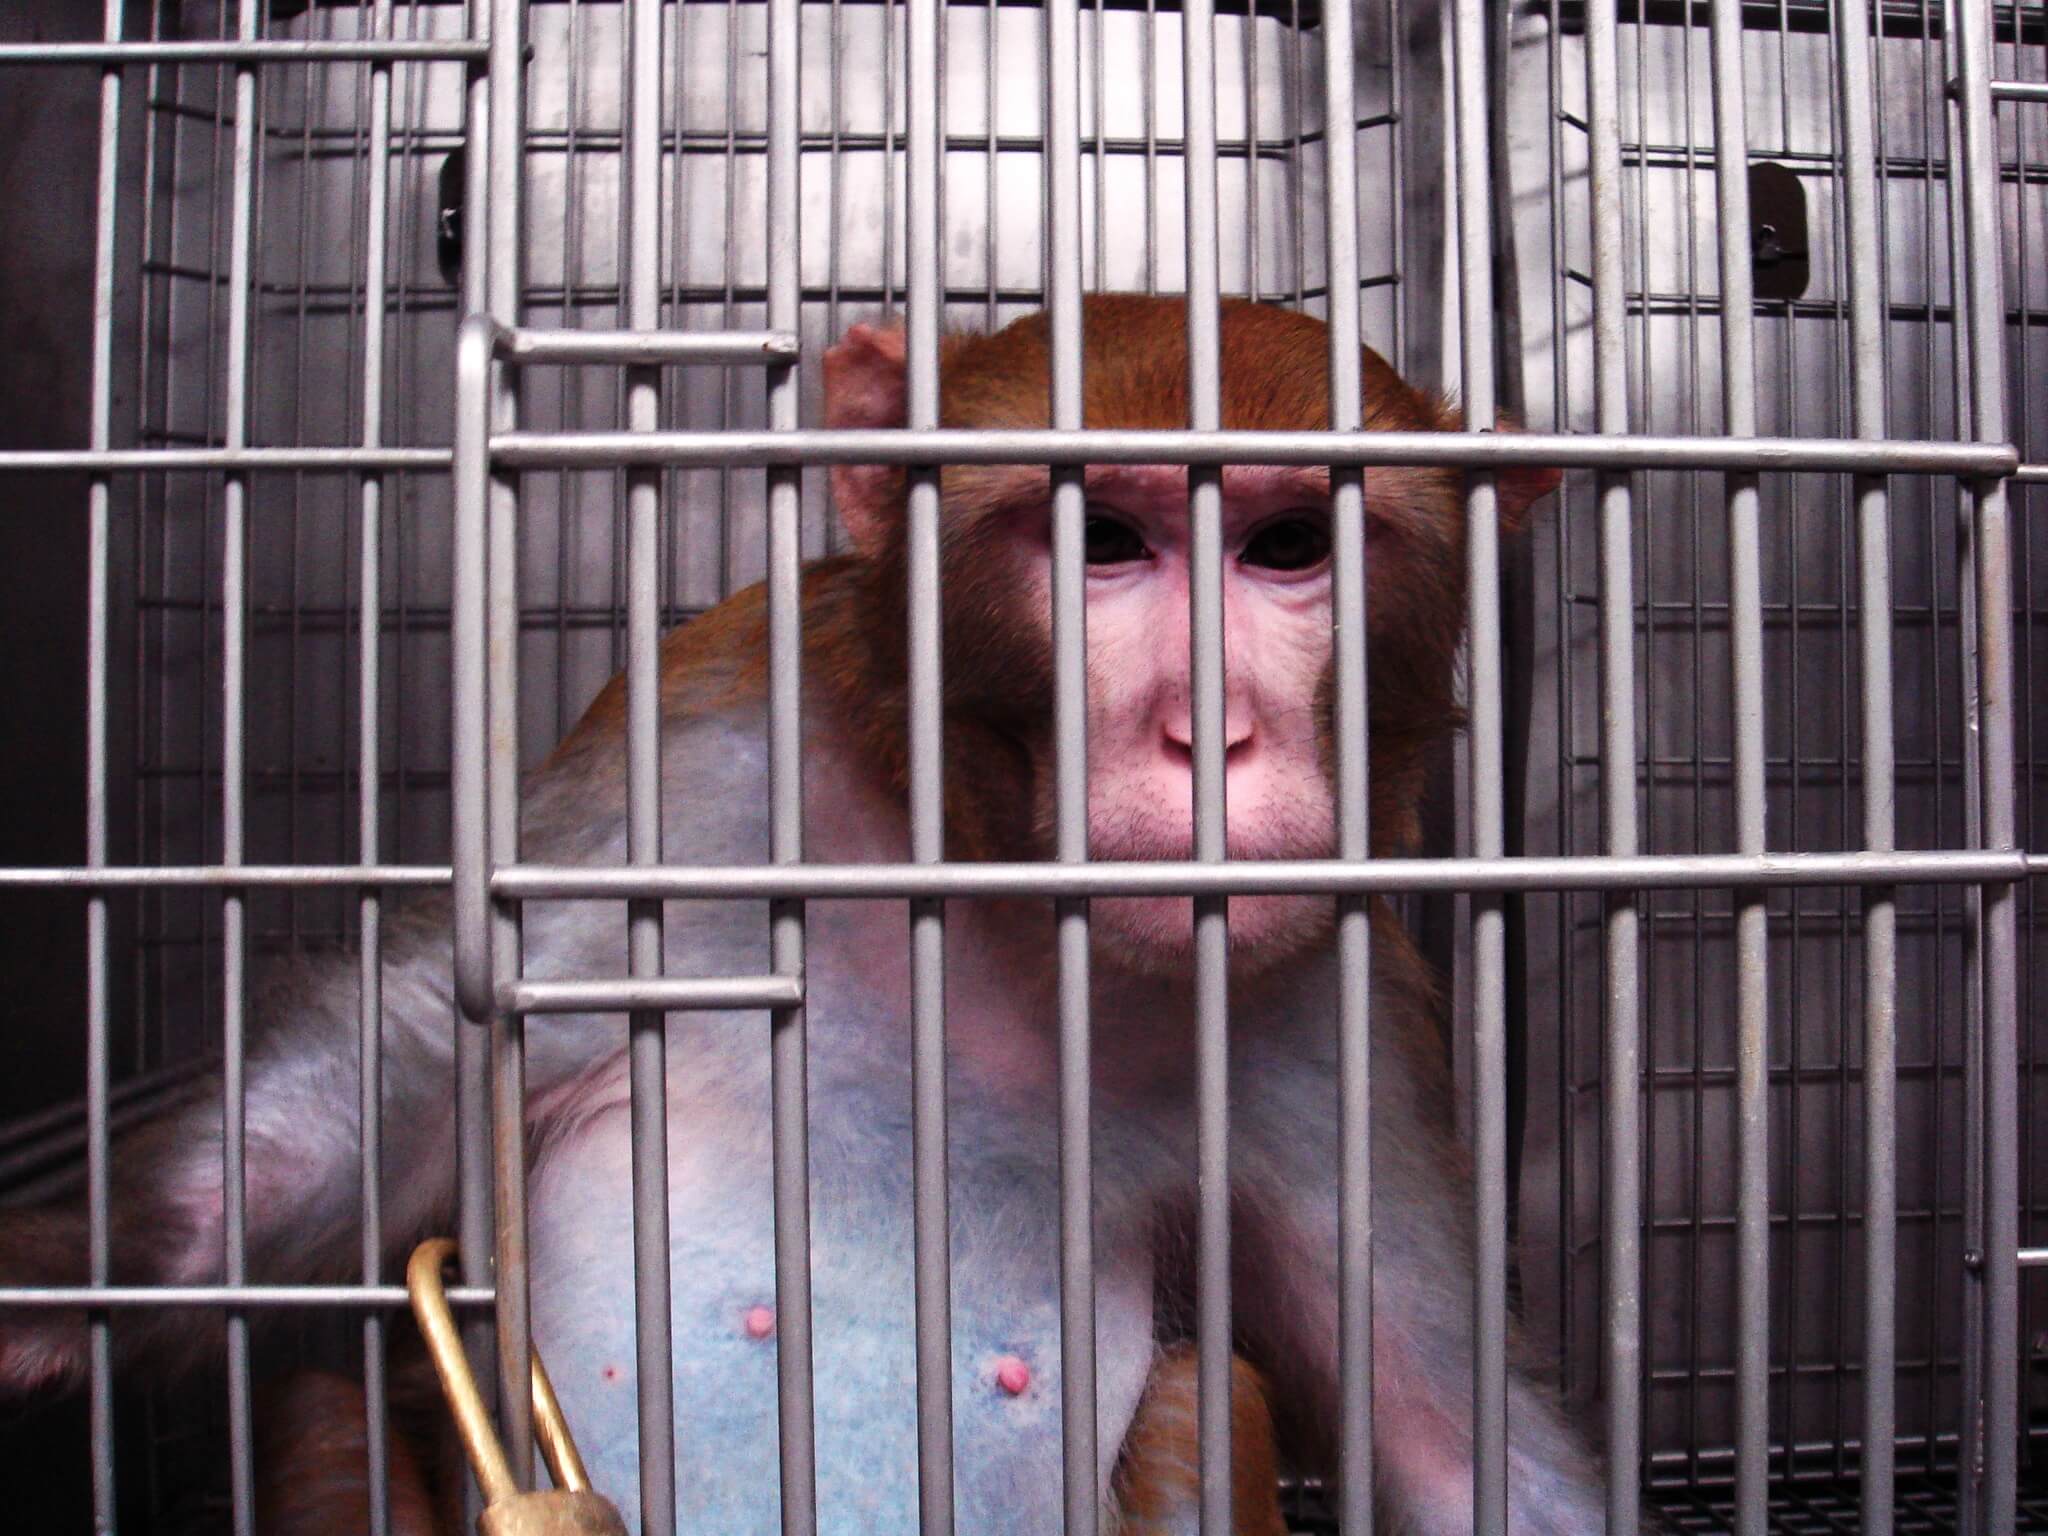 OHSU experiments on monkeys exposed by PETA